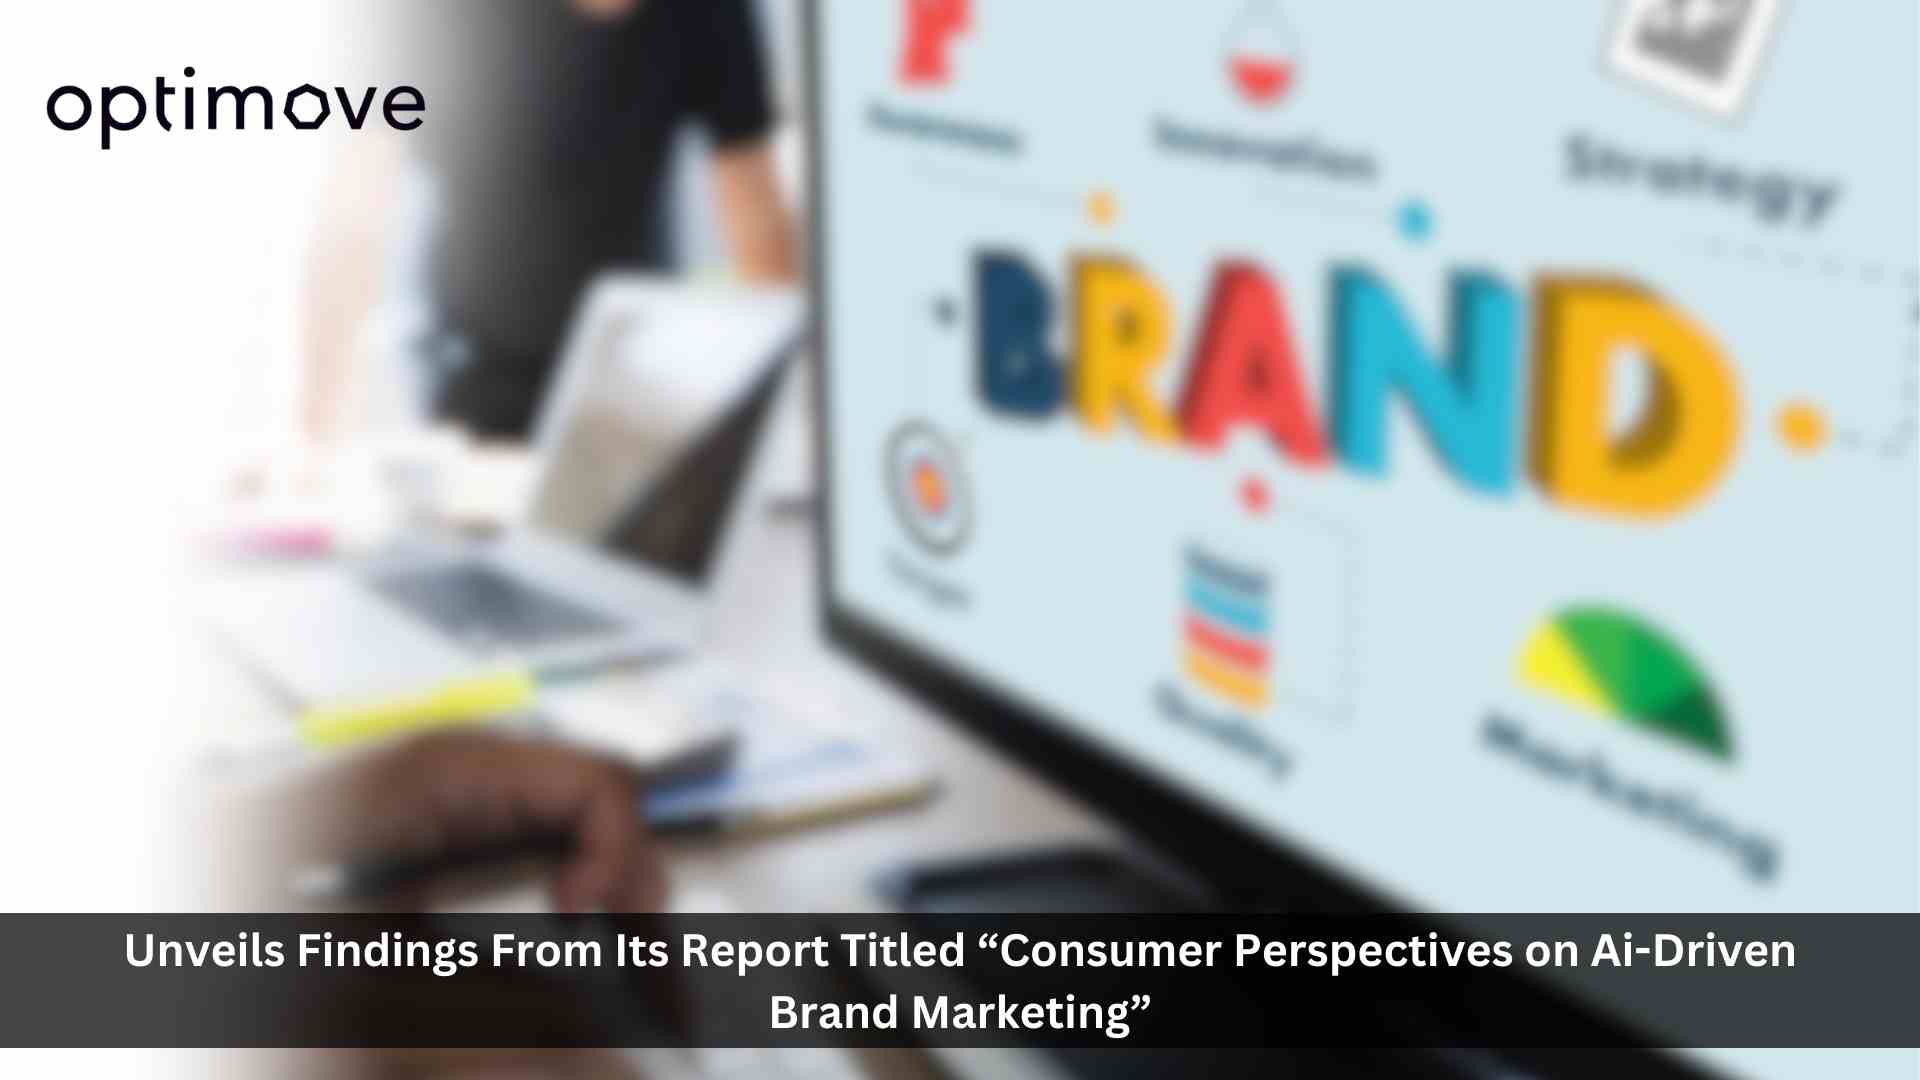 Survey Reveals Over Half of U.S.Consumers Hold Positive Views on AI in Marketing